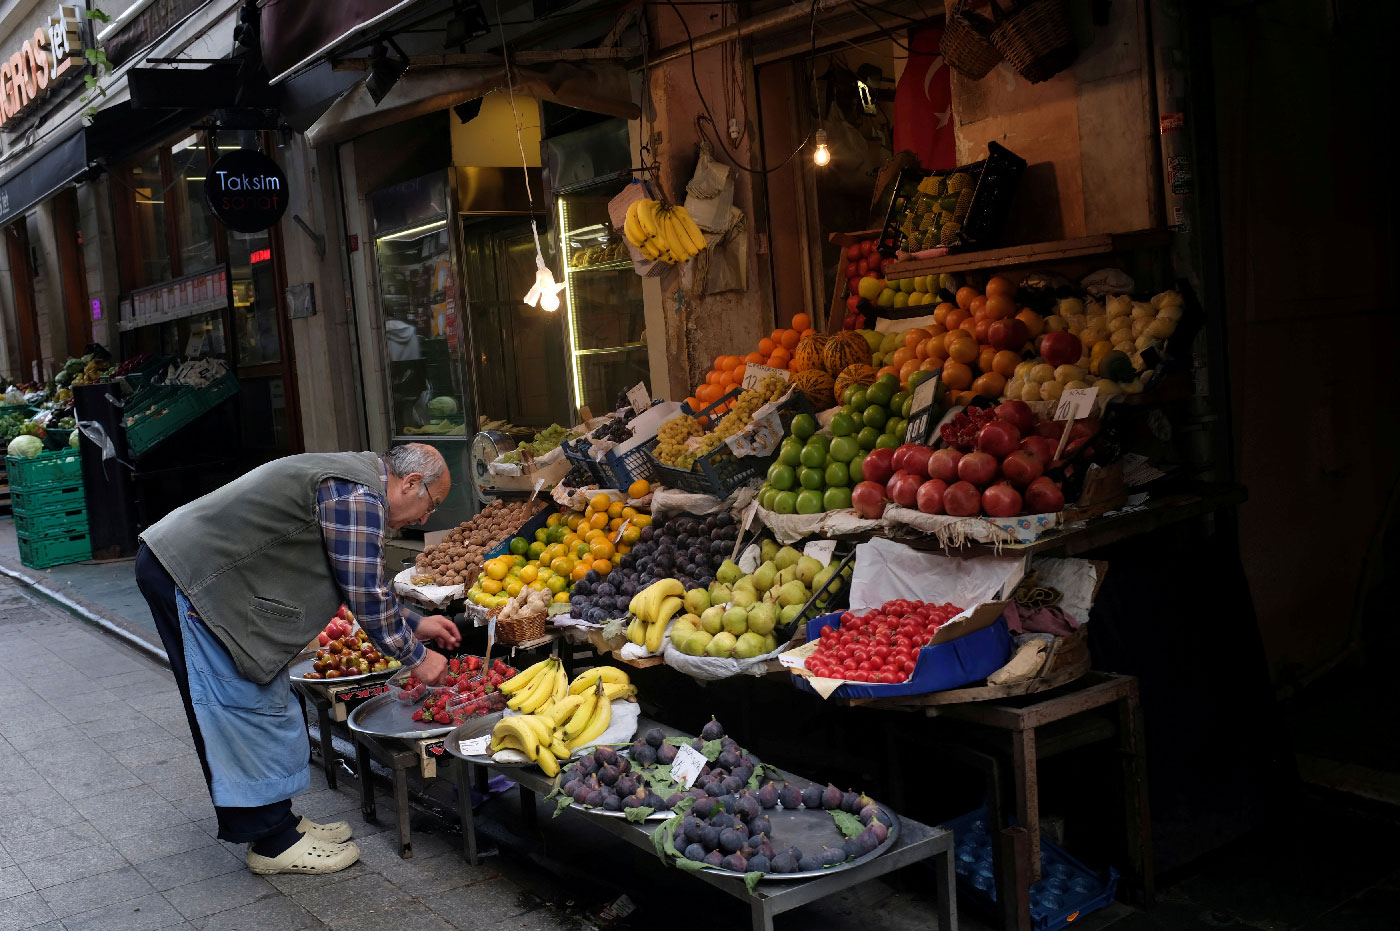 A vendor displays fruits in his shop in a local market in central Istanbul, Turkey October 9, 2018.